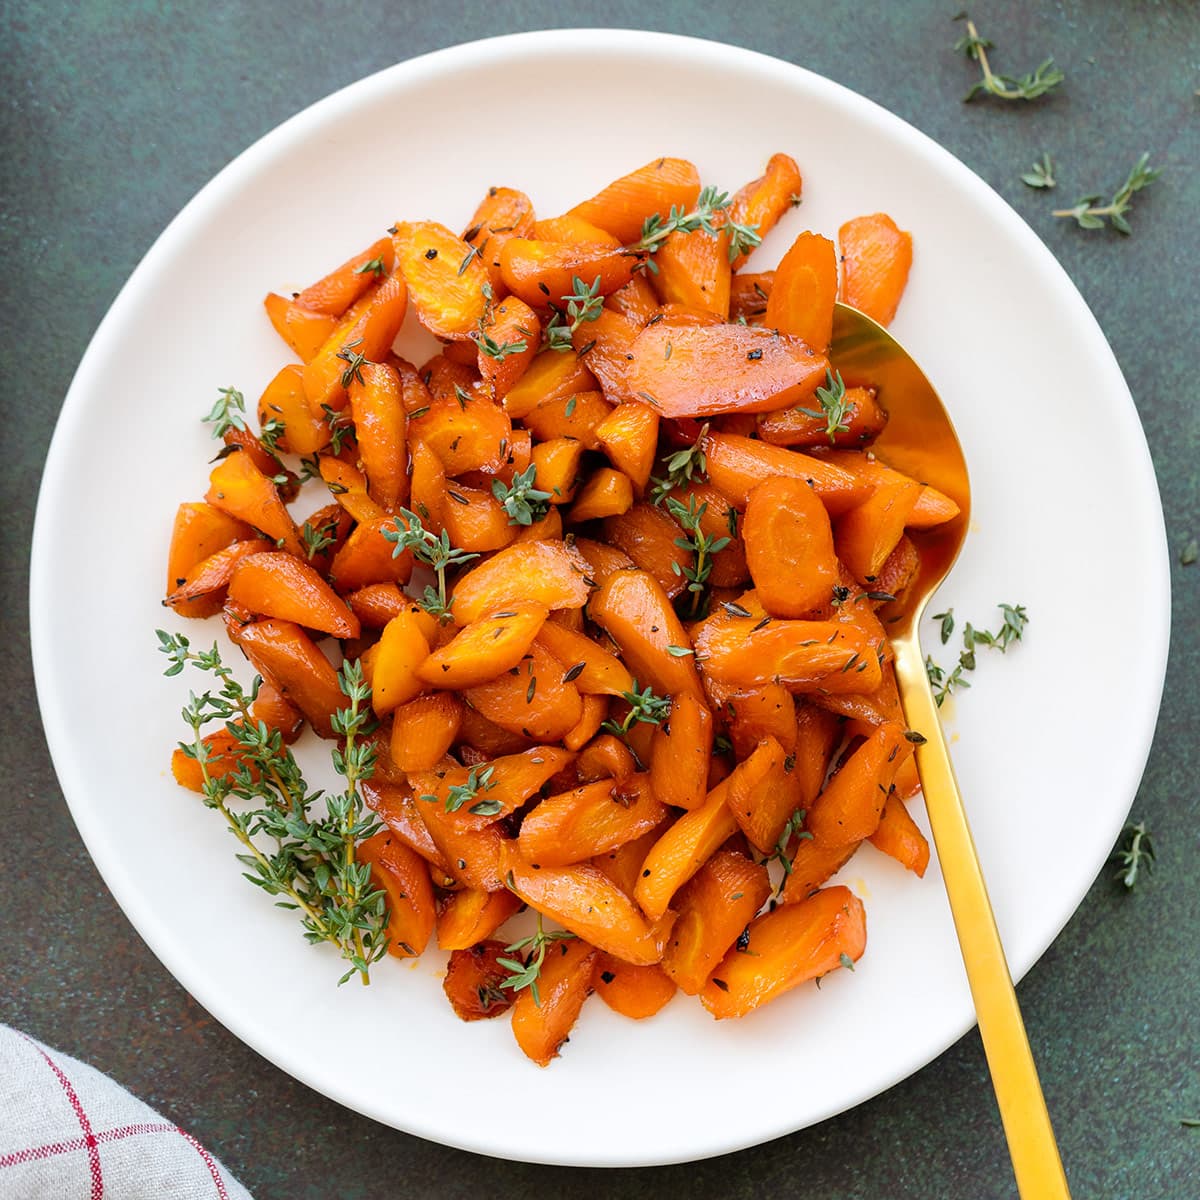 Roasted carrots garnished with fresh thyme on a white plate with a gold spoon on a dark green background.